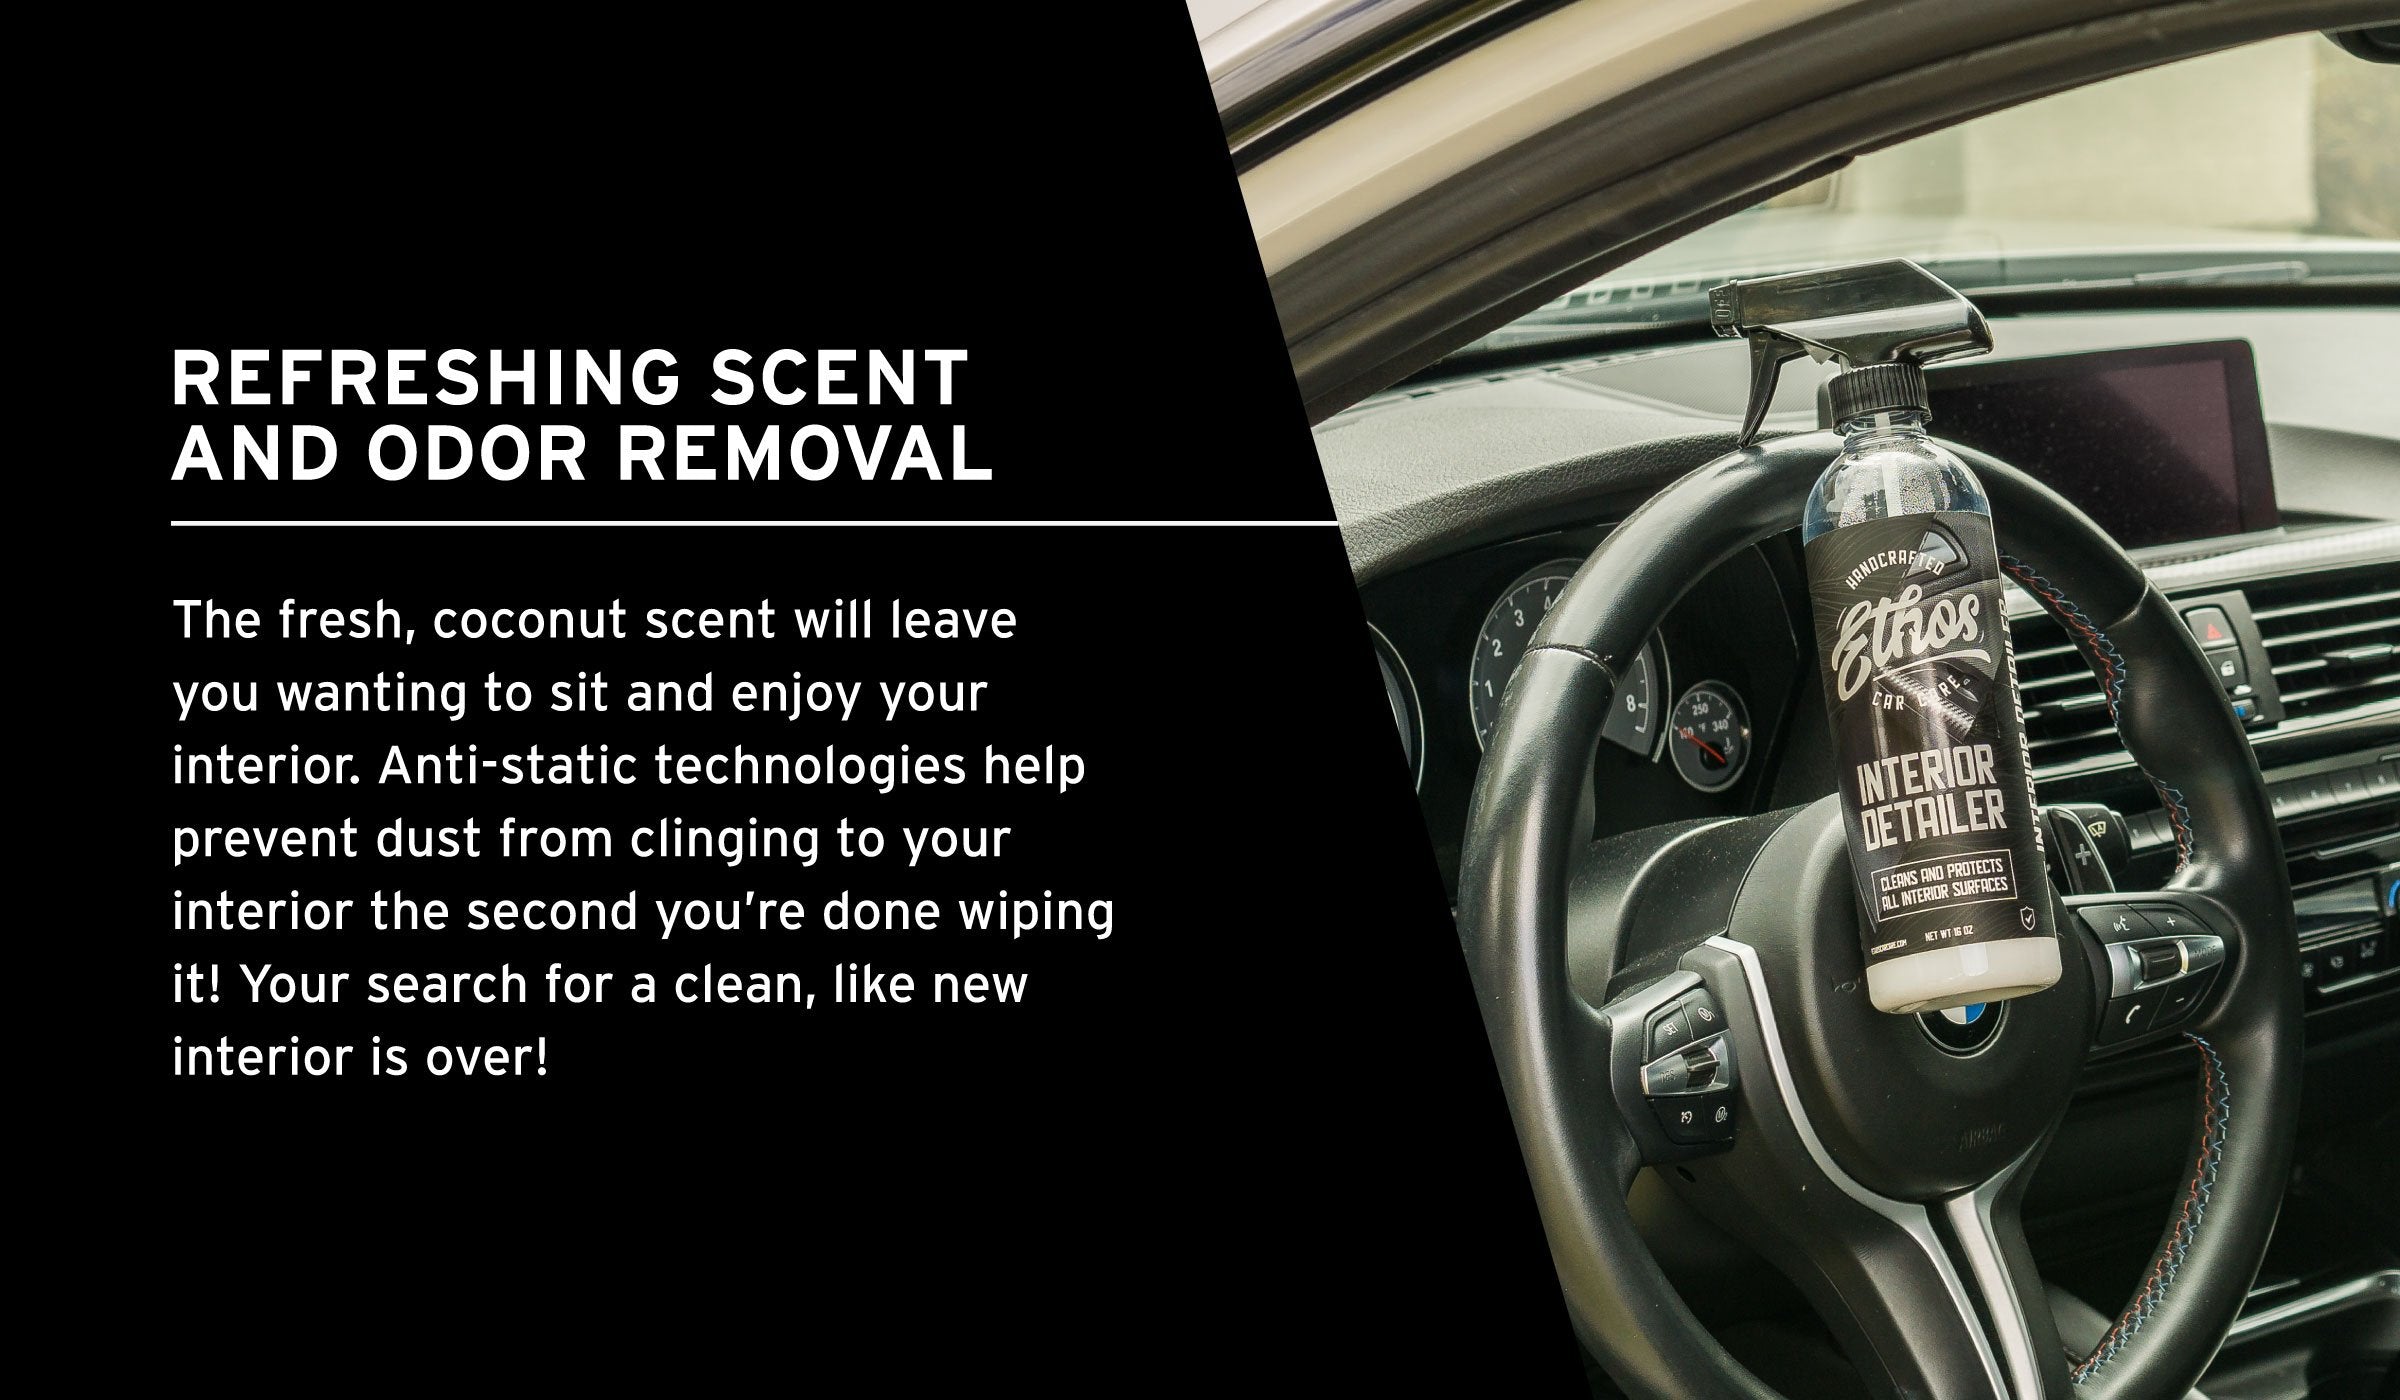 ETHOS INTERIOR DETAILER REFRESHING SCENT AND ODOUR REMOVAL